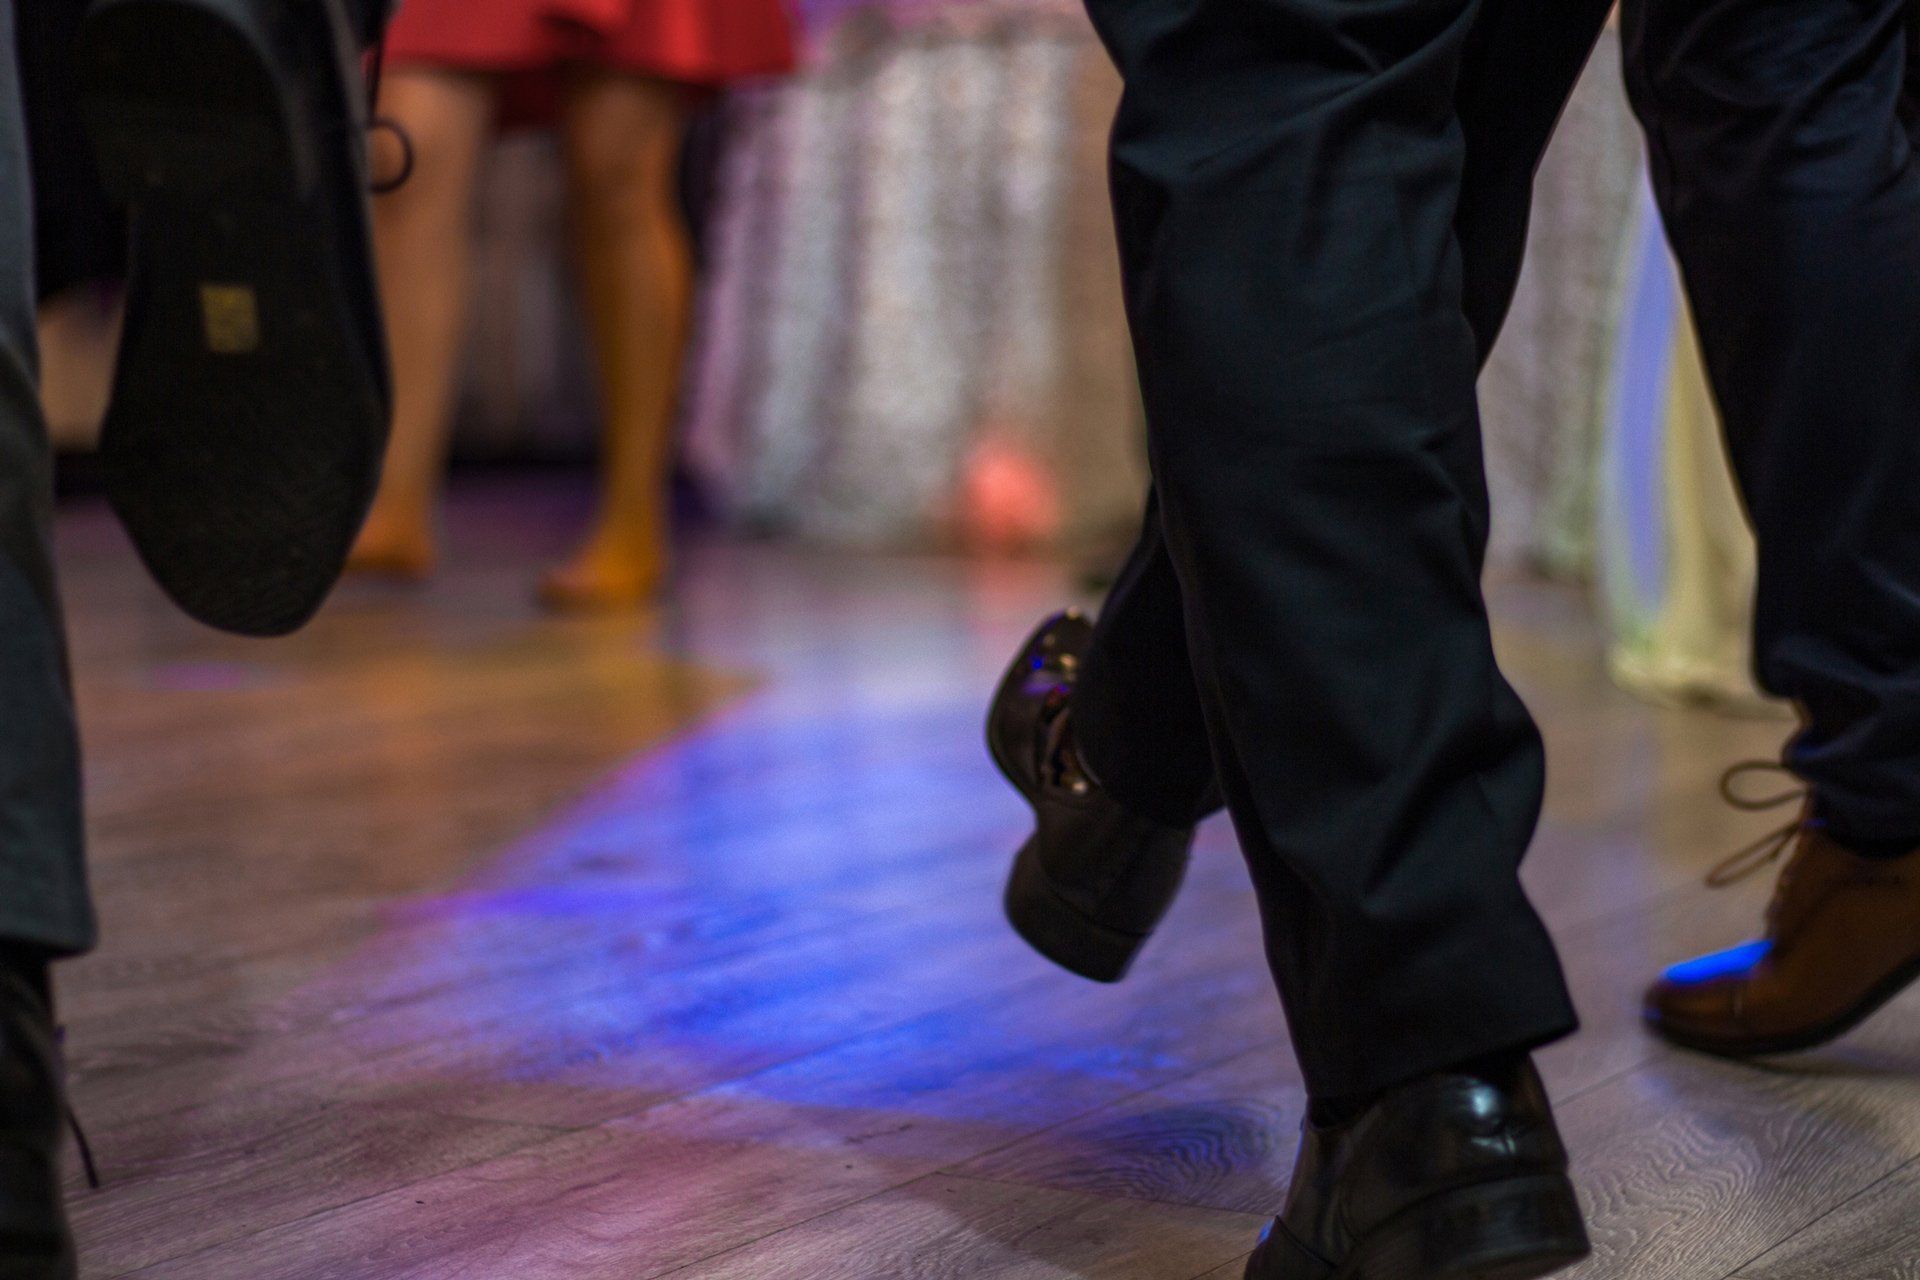 3 Things To Consider When Purchasing Dance Floor Cleaning Products